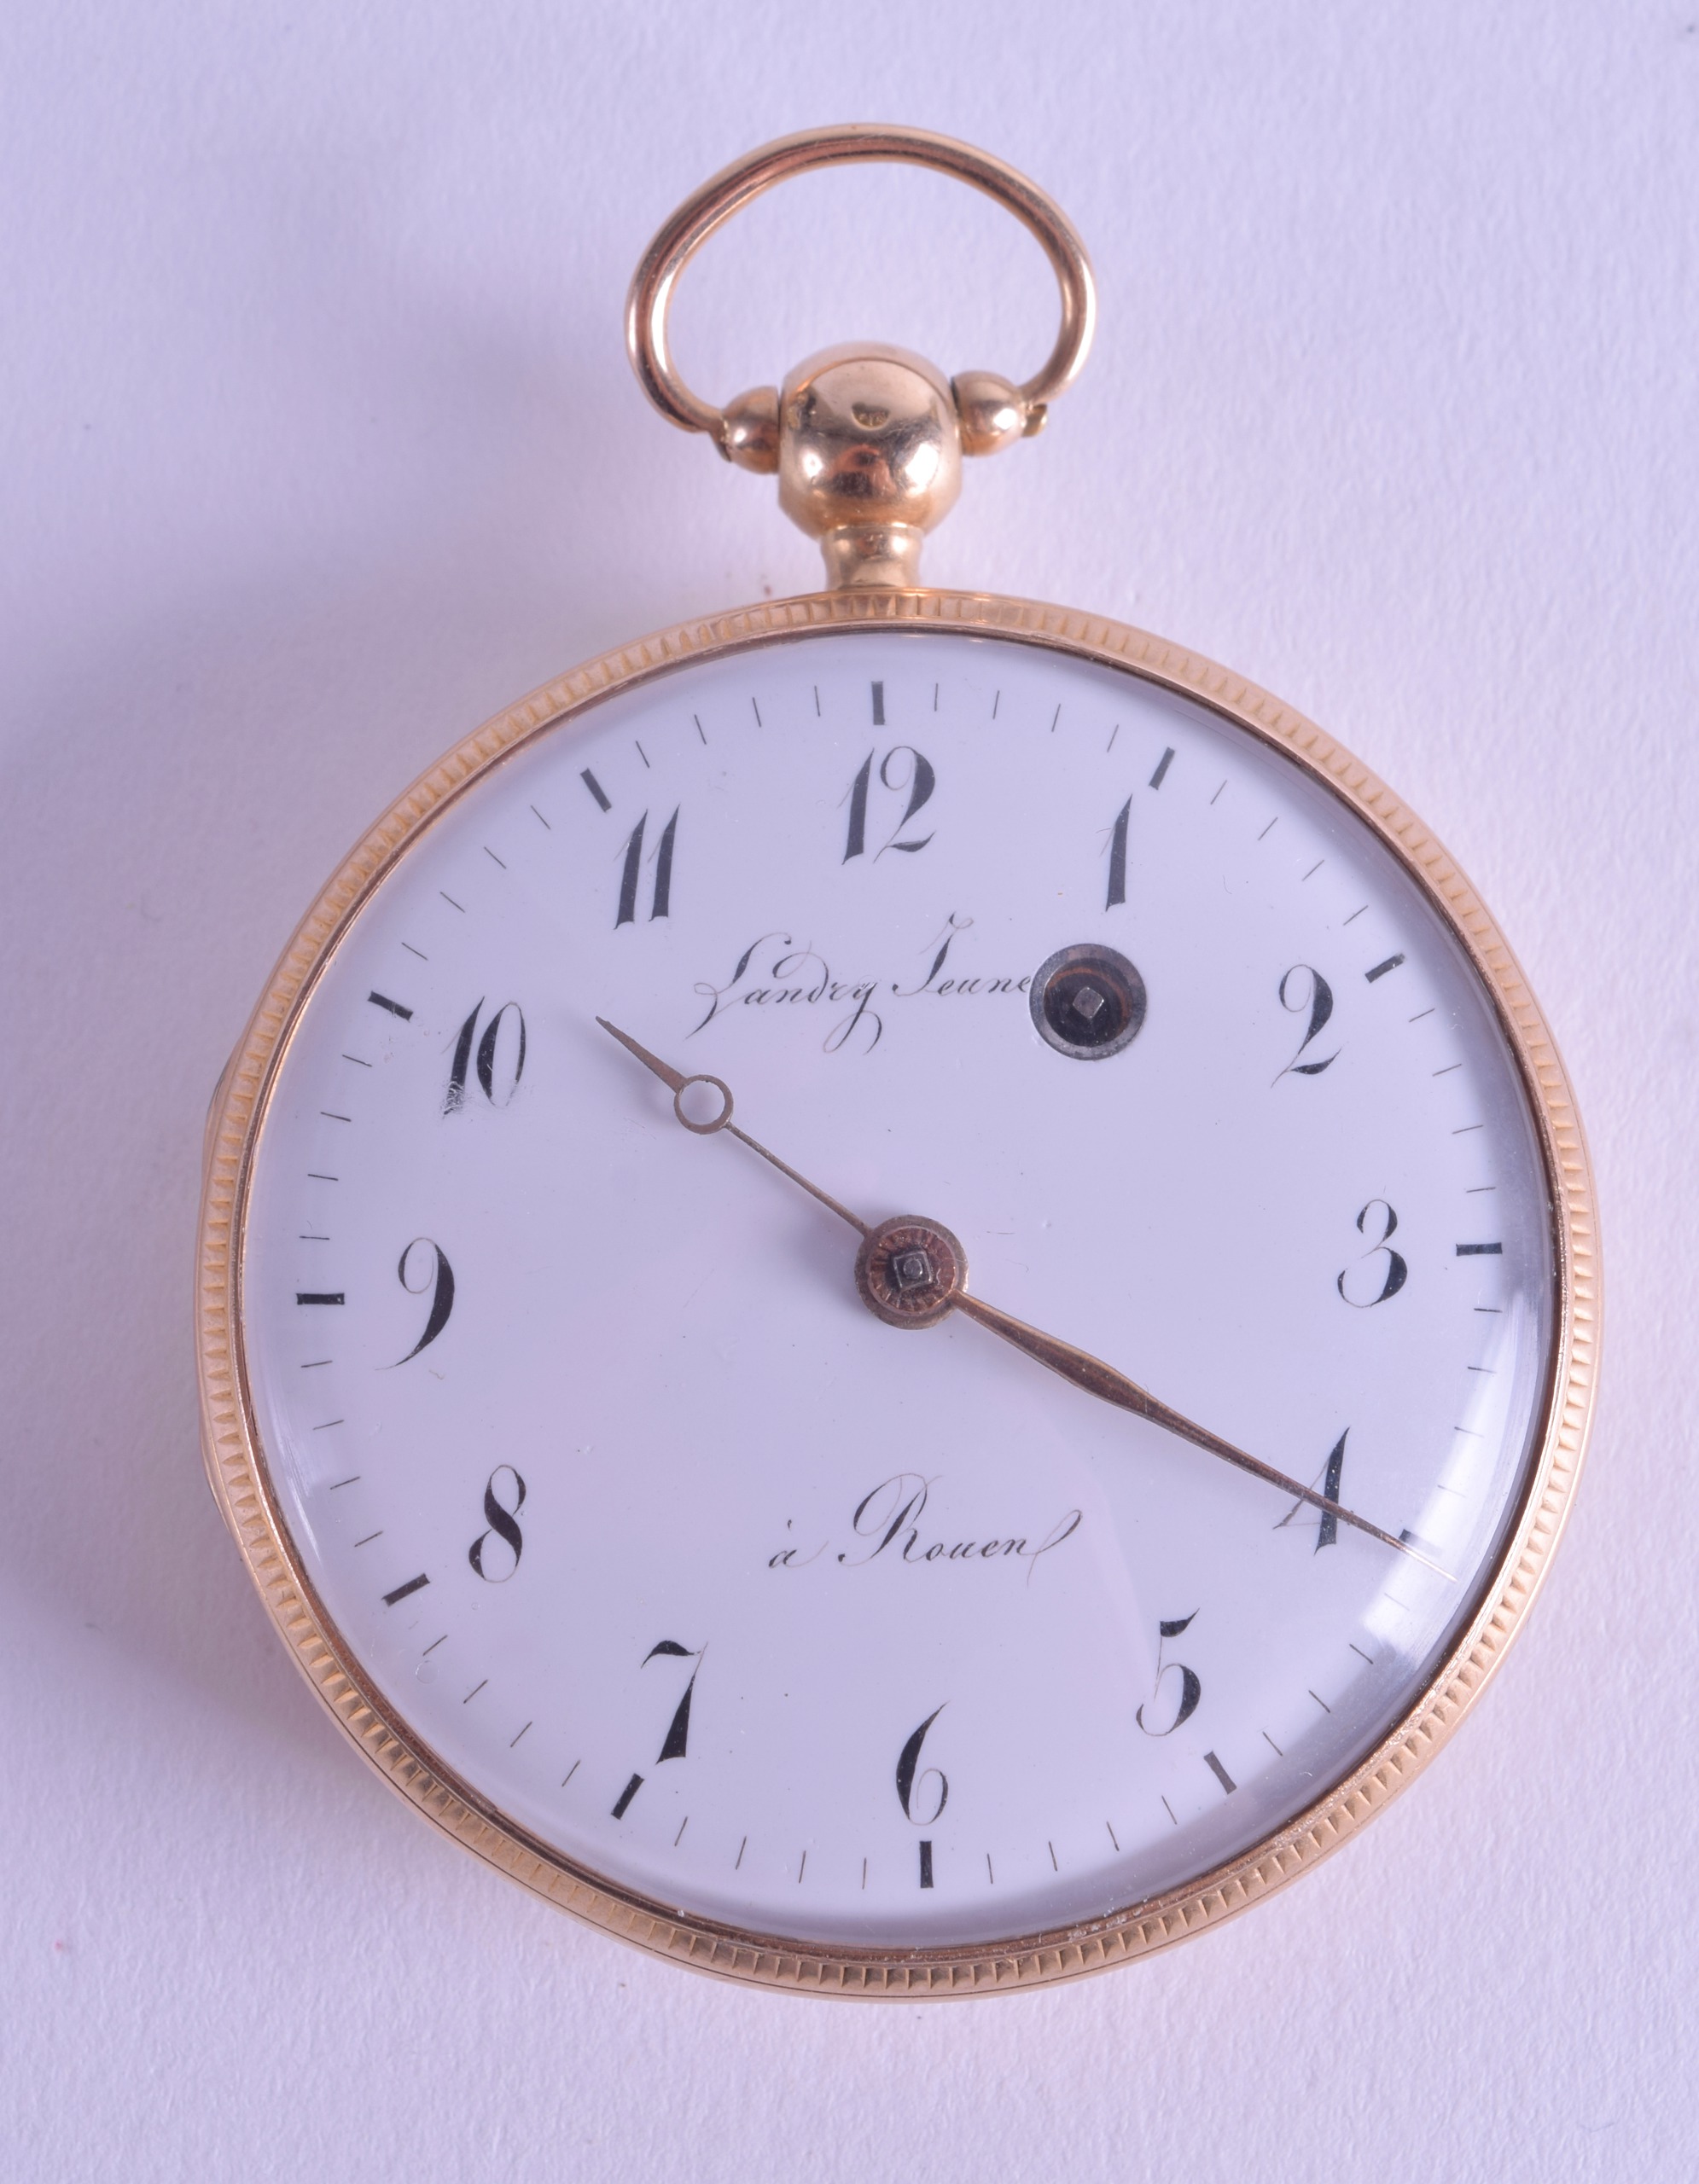 A MID 19TH CENTURY FRENCH 18CT GOLD POCKET WATCH with white enamel dial and black numerals. 109.4